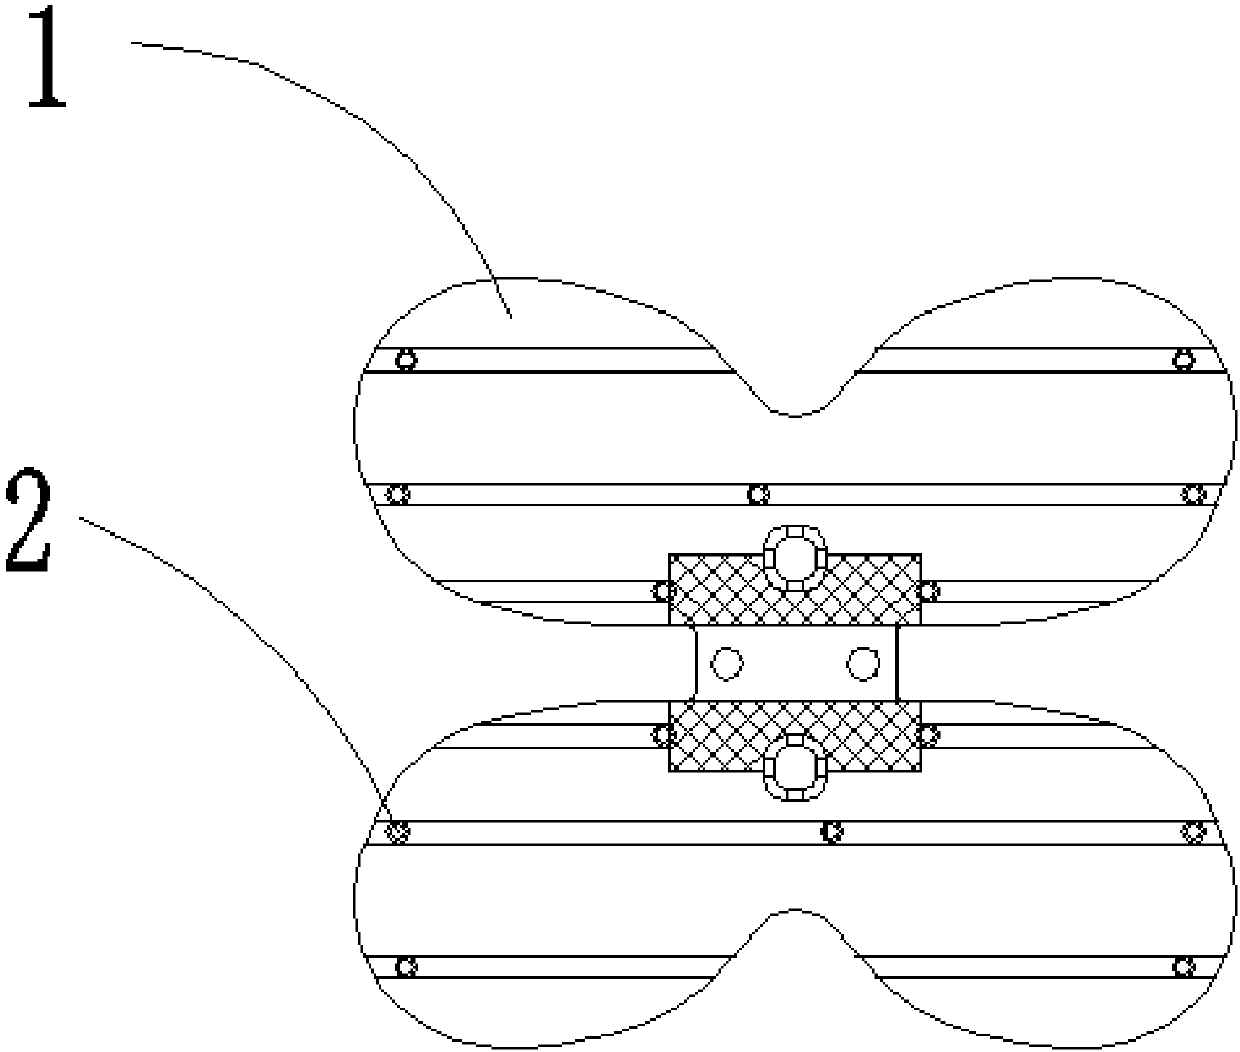 Process method for producing glass bodies of glasses